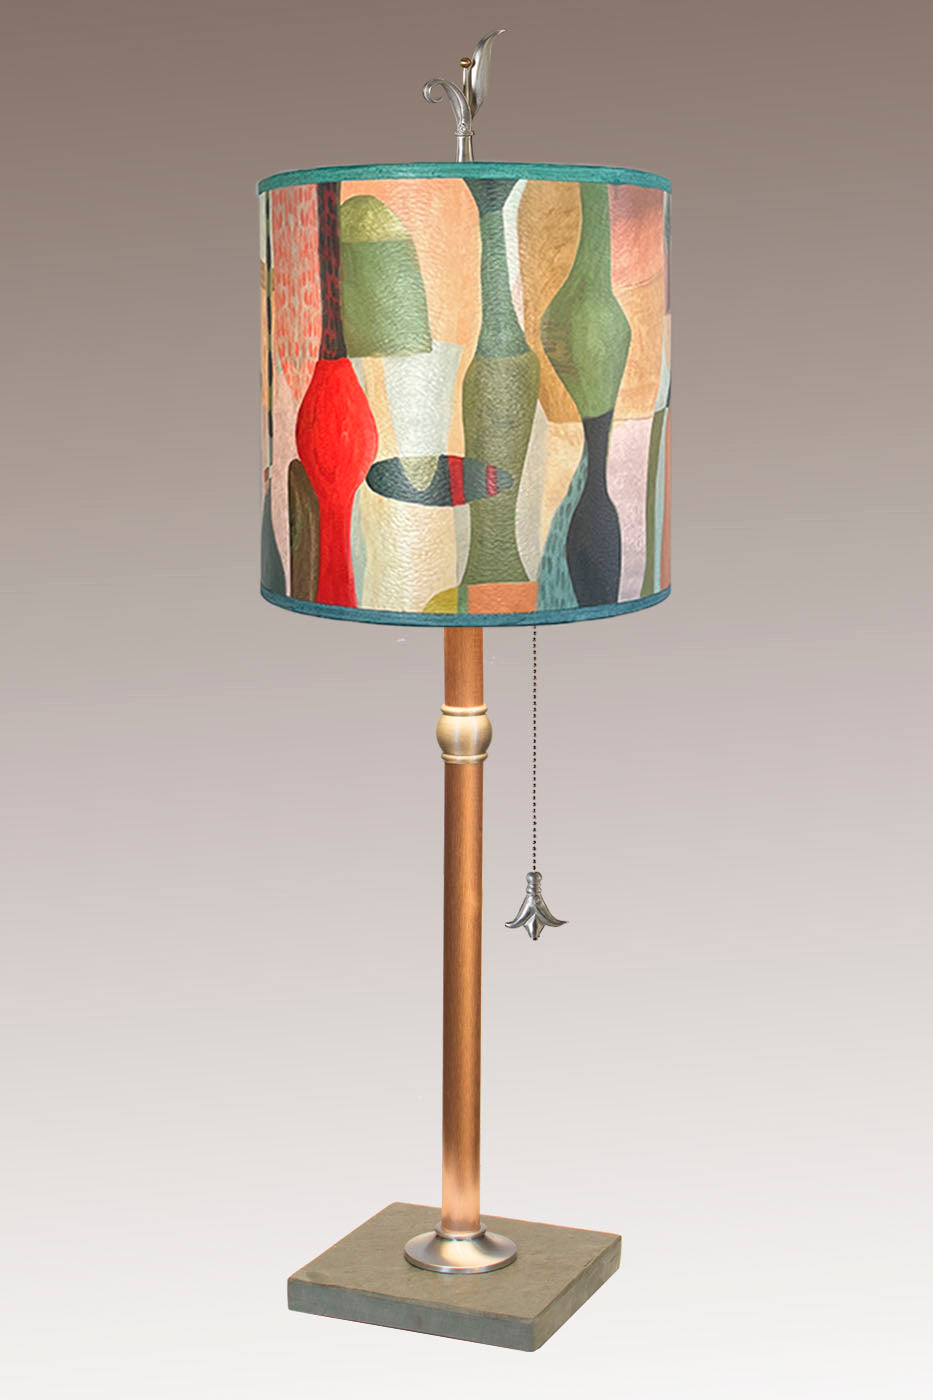 Janna Ugone & Co Table Lamp Copper Table Lamp with Medium Drum Shade in Riviera in Poppy